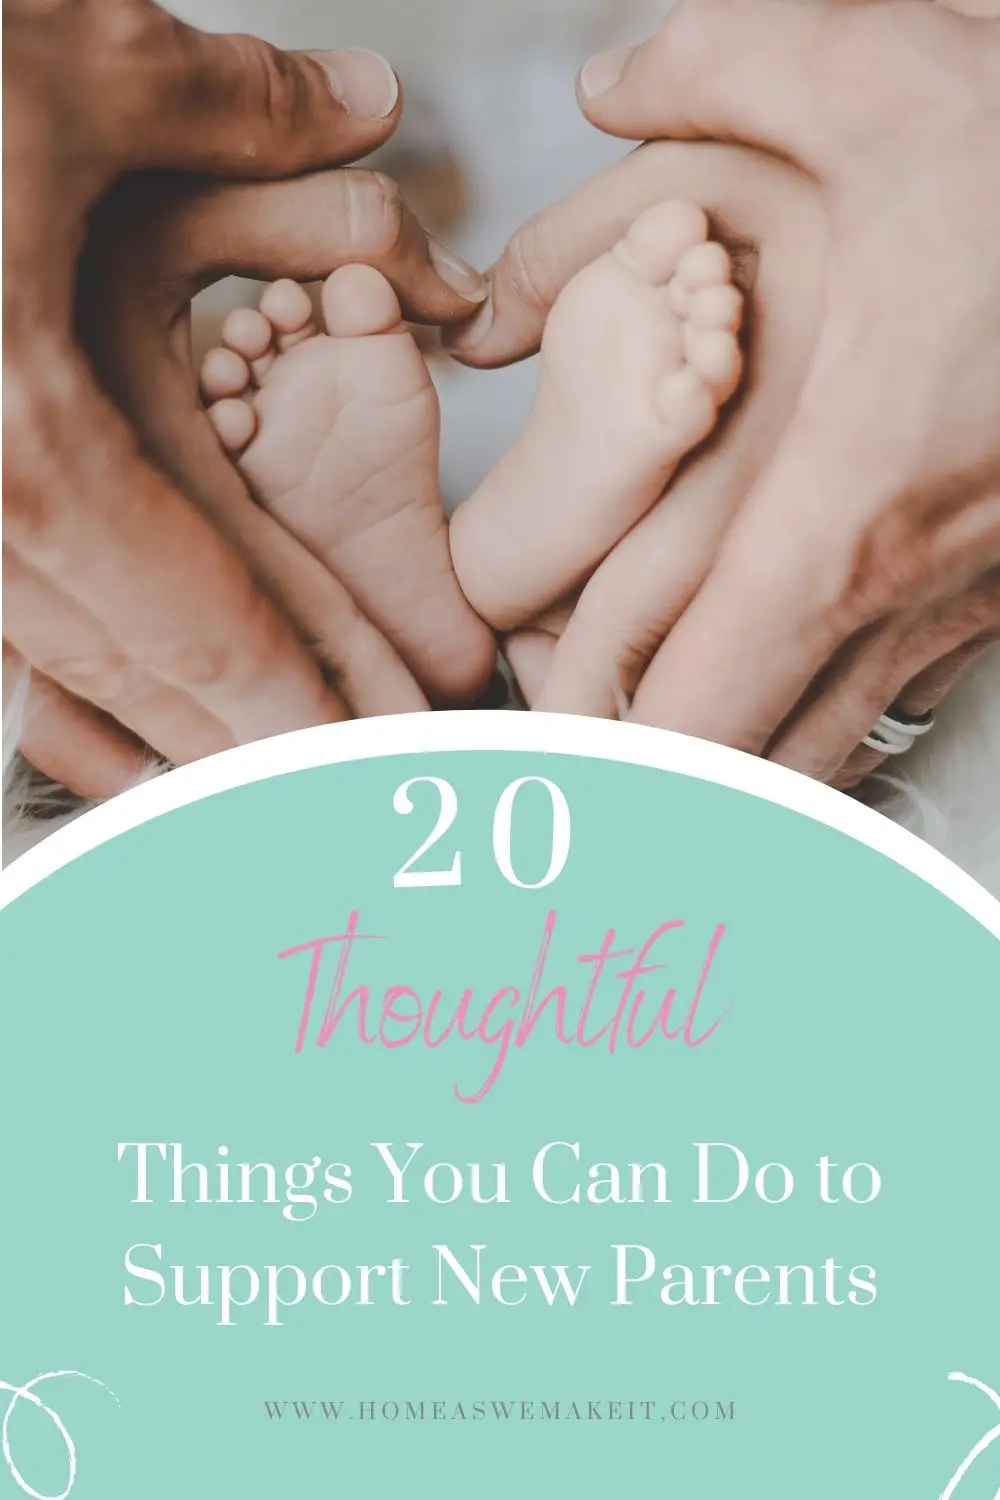 20 Thoughtful things you can do to support new parents